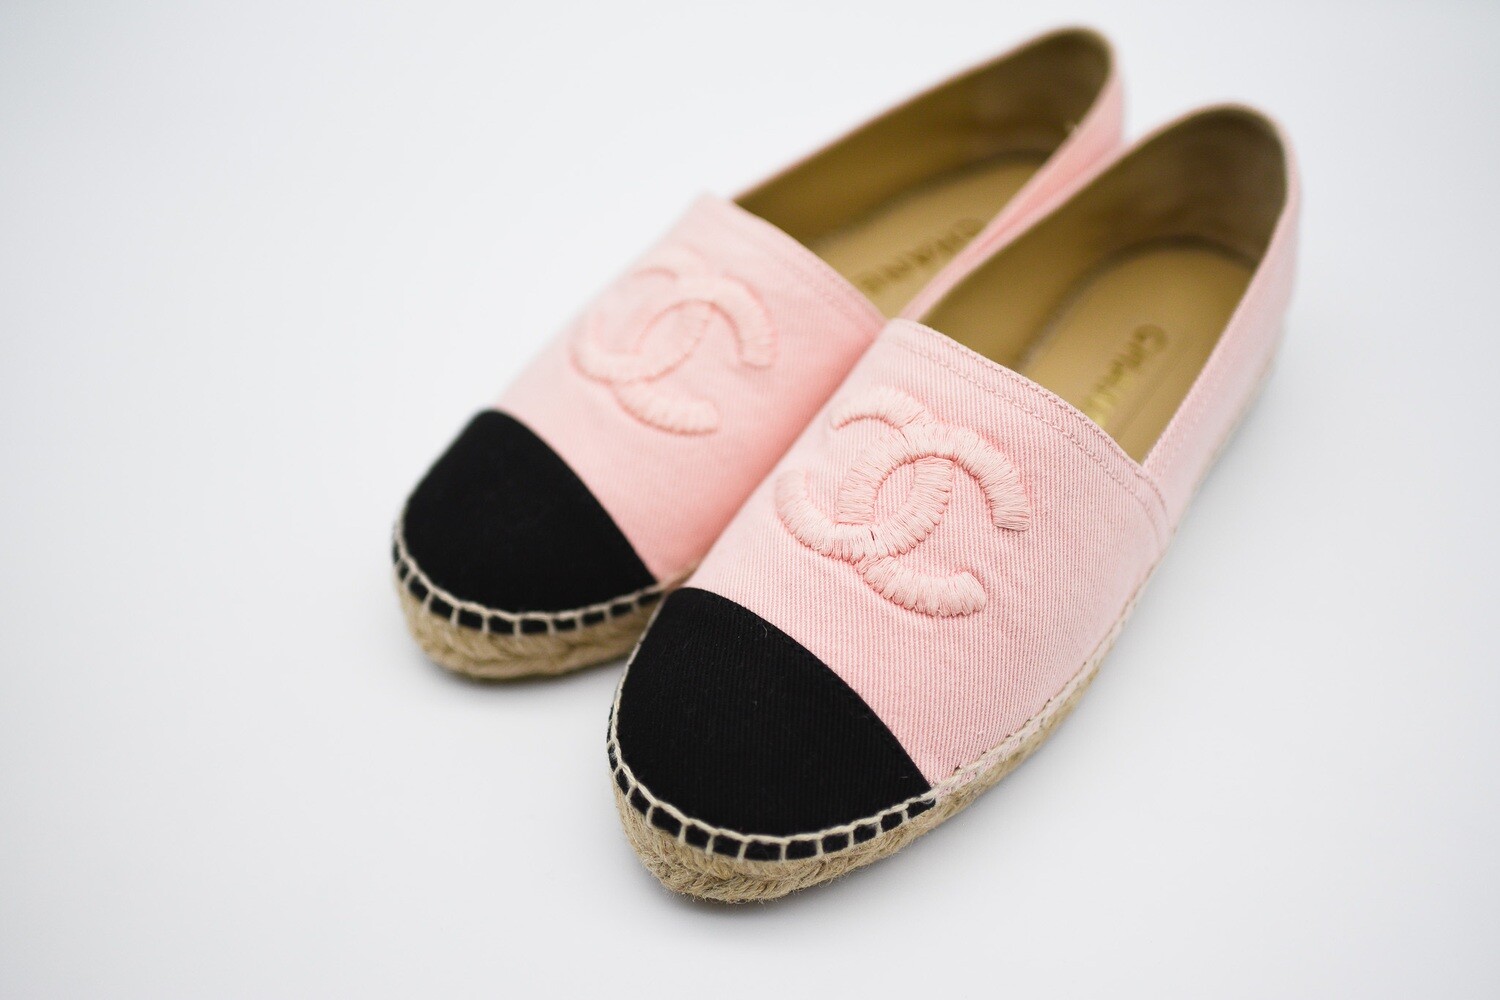 Chanel Espadrilles, Pink, Size 38, New in Box MA001